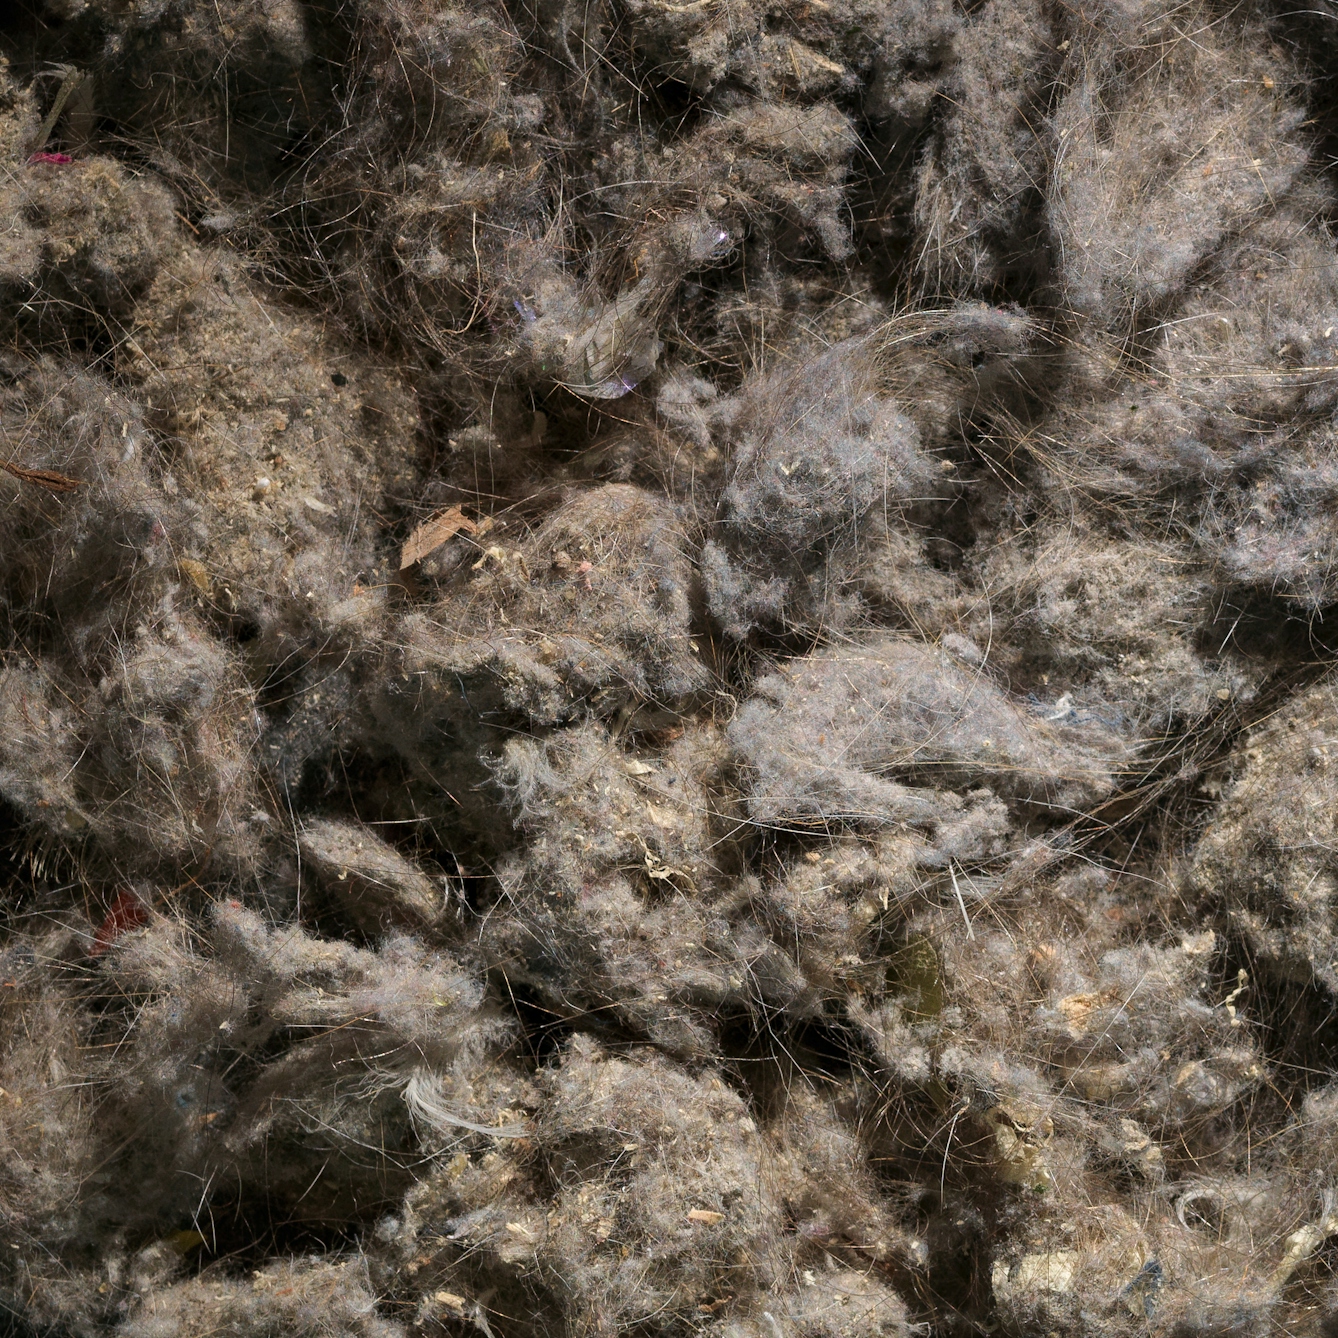 Photograph of a close up of the contents of a vacuum cleaner bag, showing dust, human hairs and other pieces of dirt.